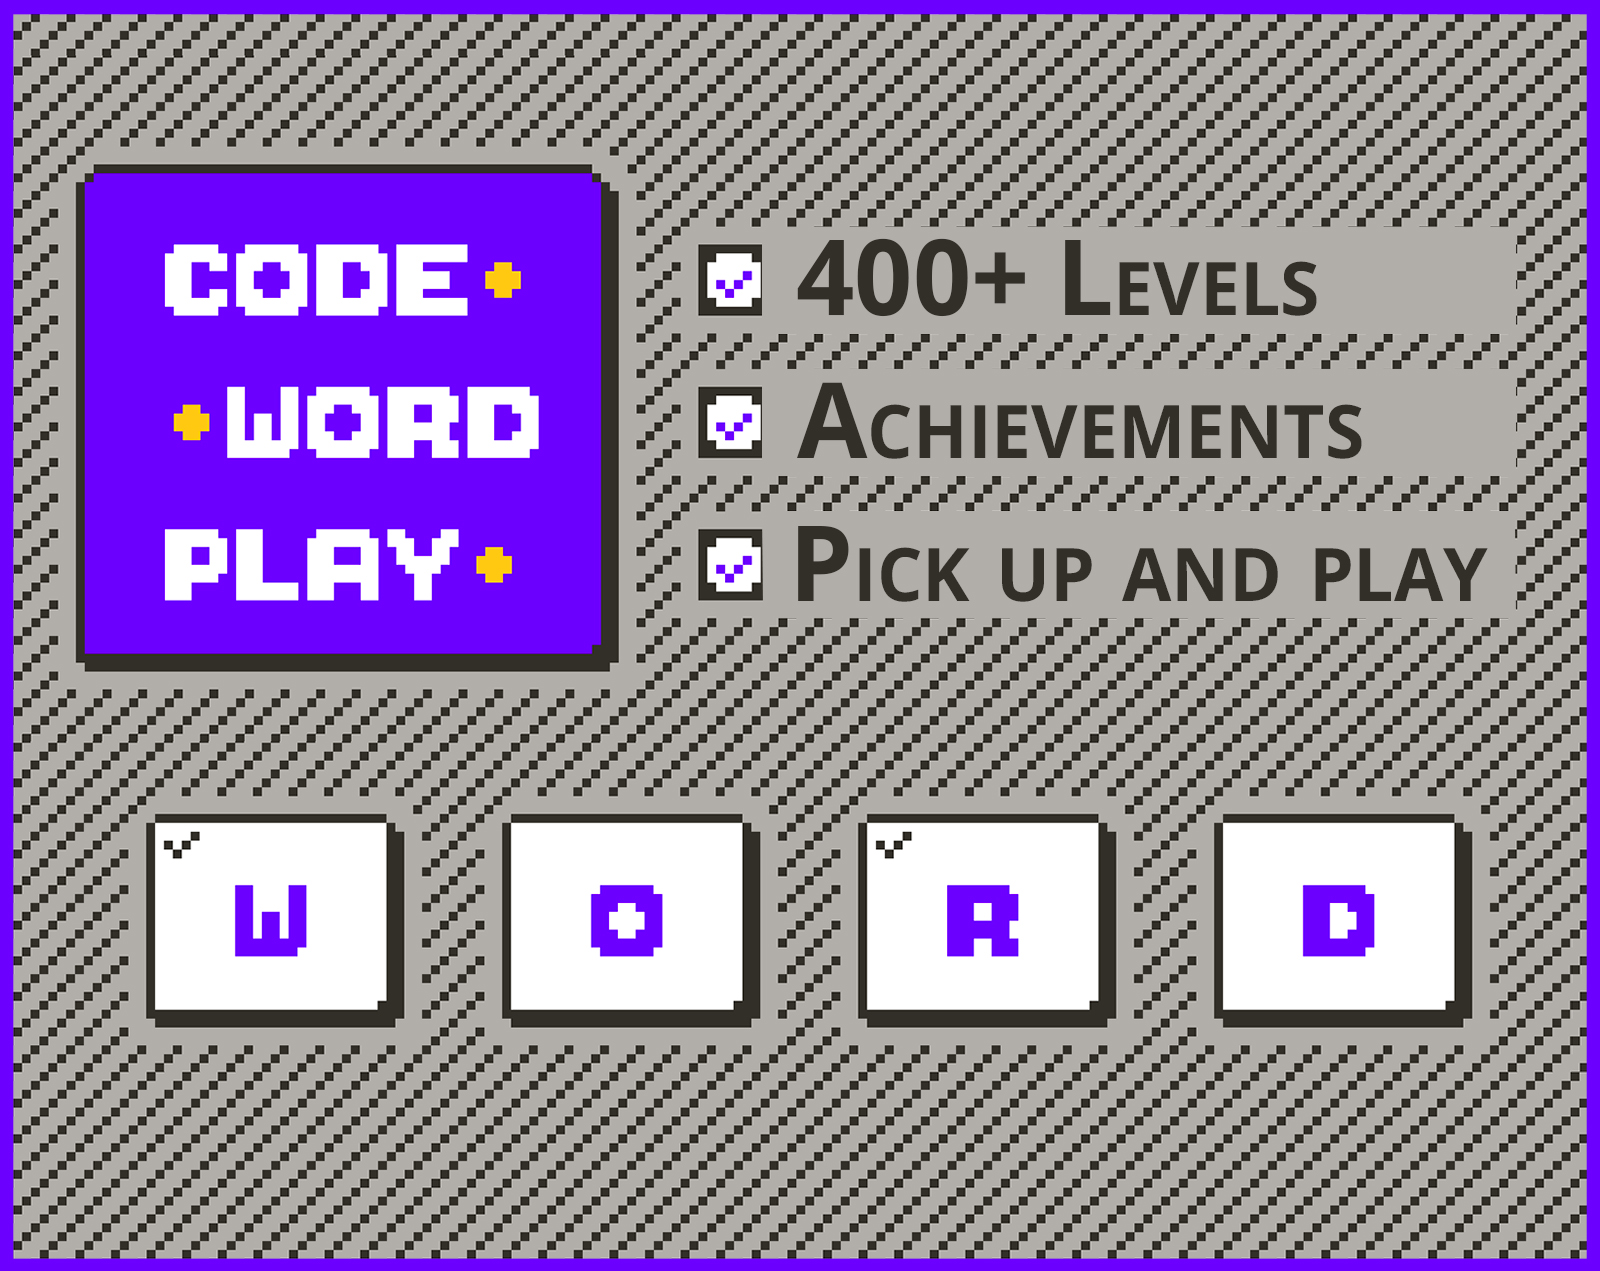 CodeWordPlay: Mystery word puzzle game for Playdate by mikesuszek